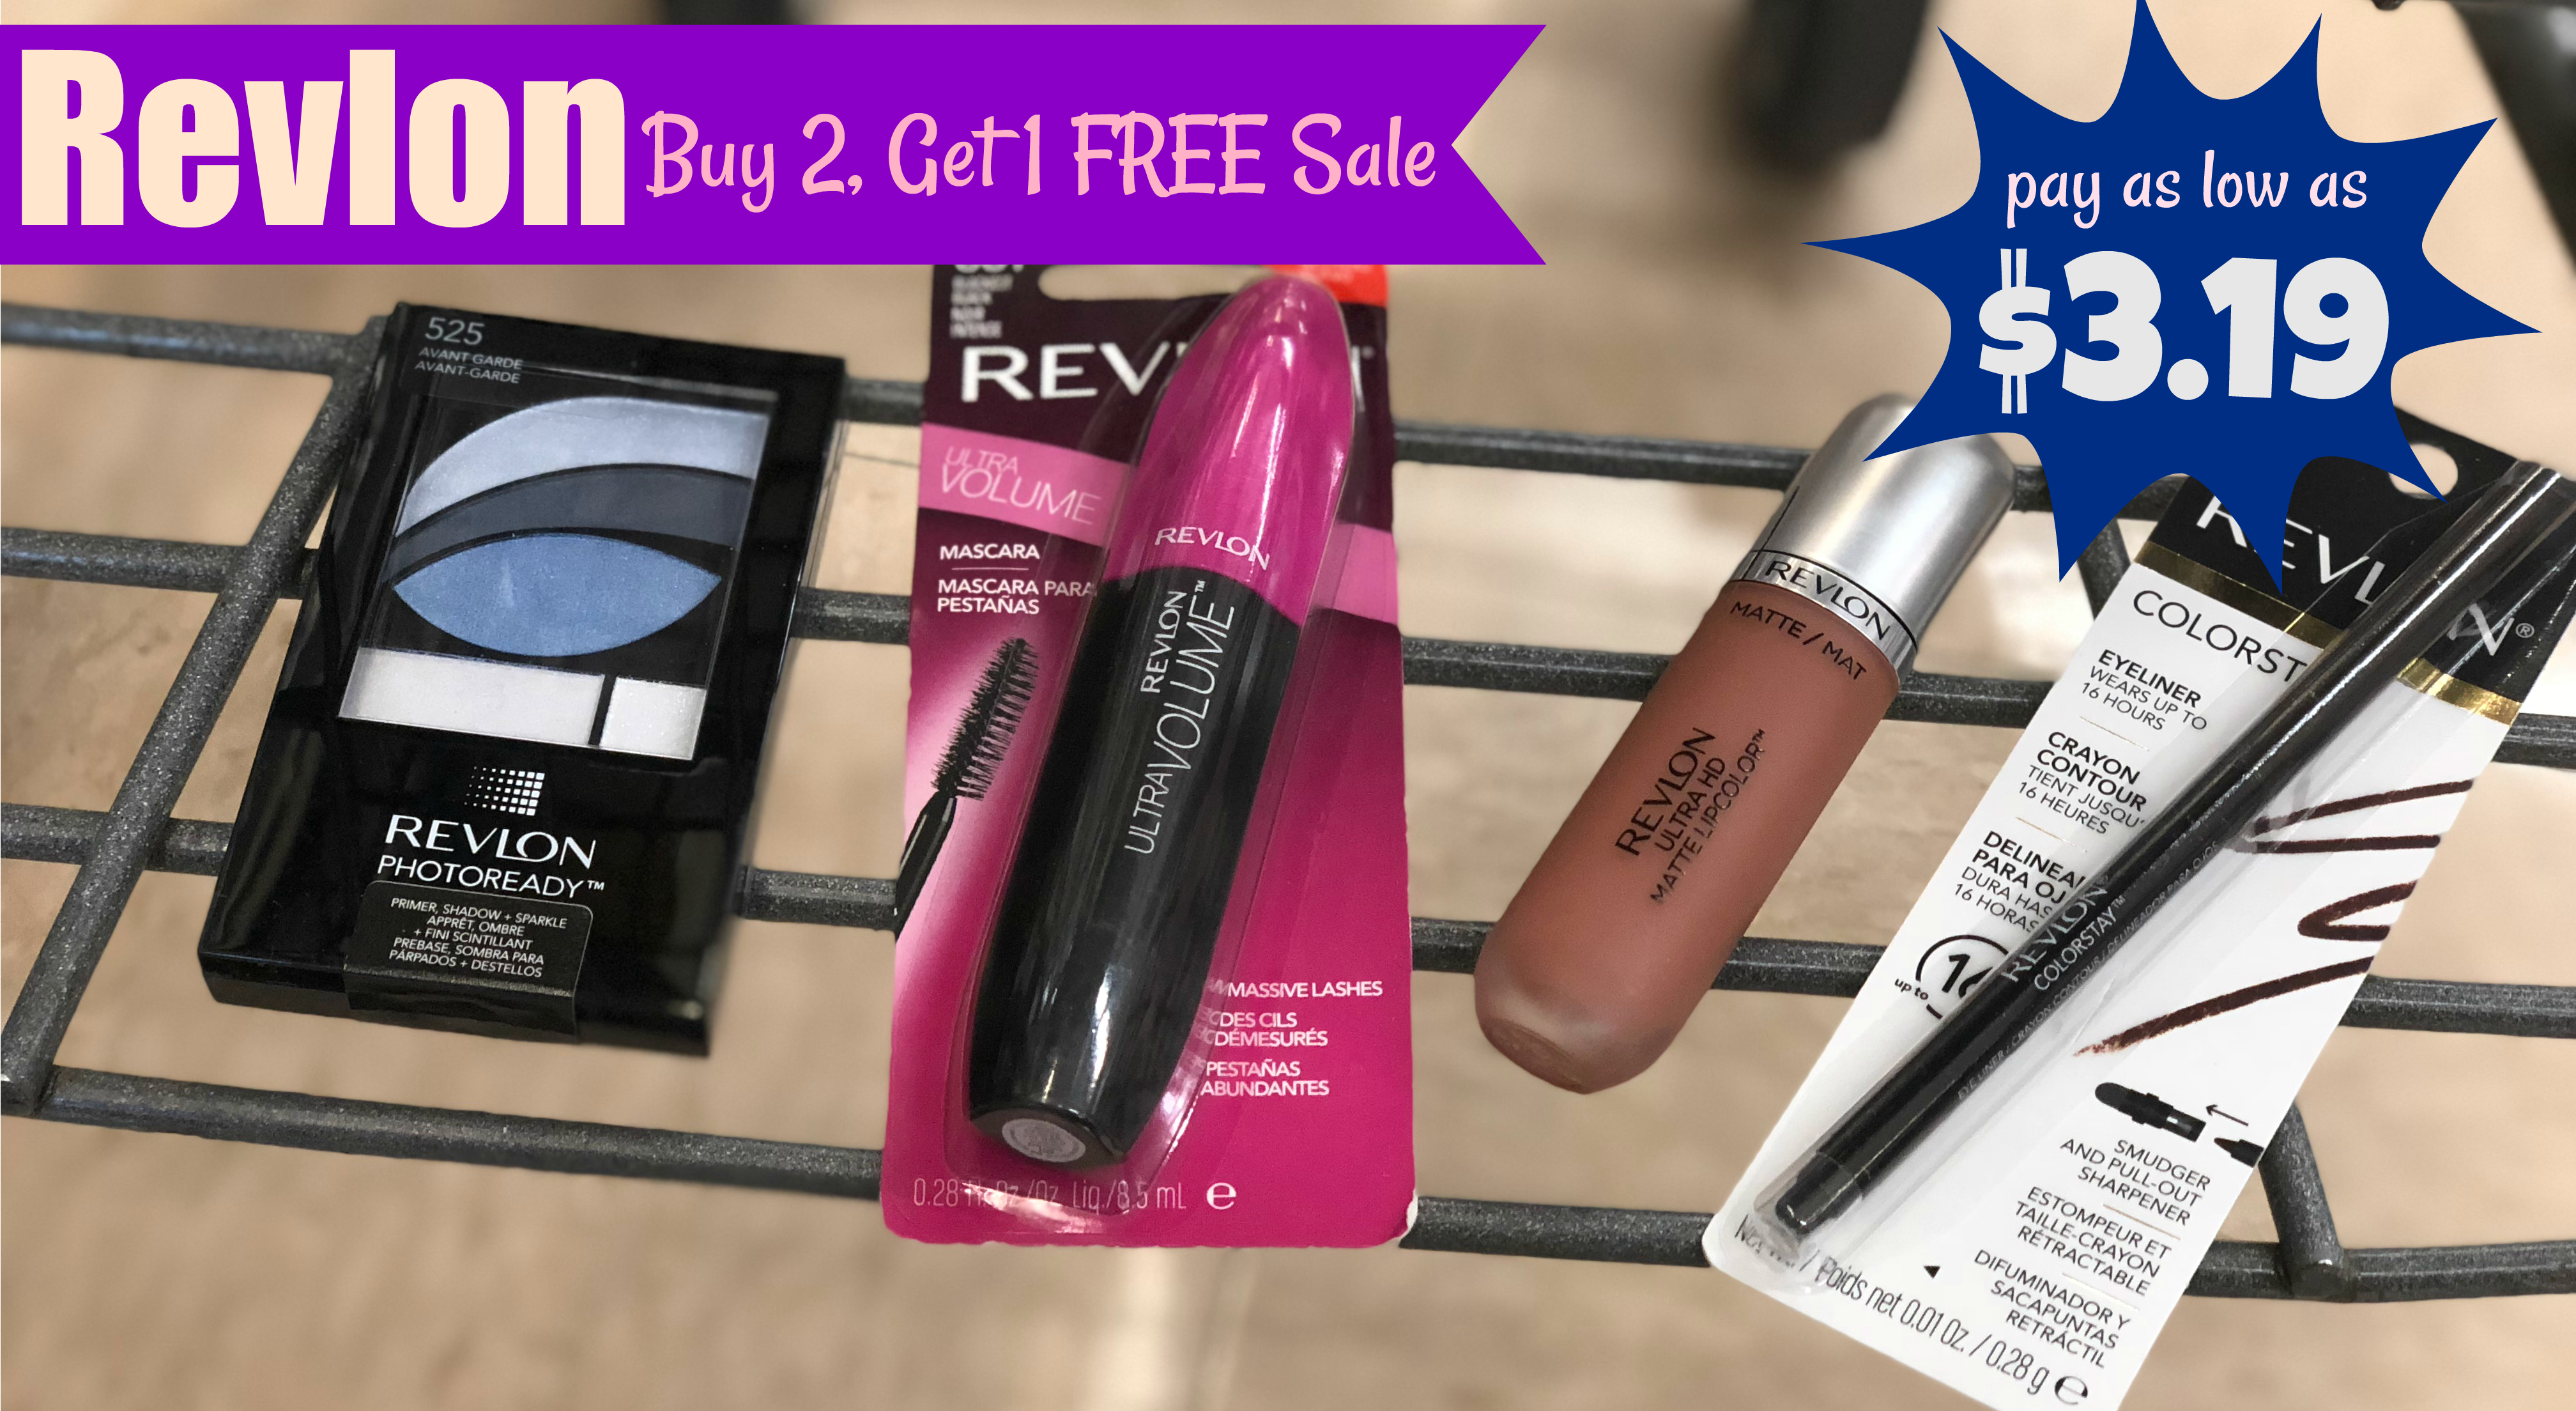 Revlon Makeup Deals at Kroger with B2G1 Free Sale! Pay as low as